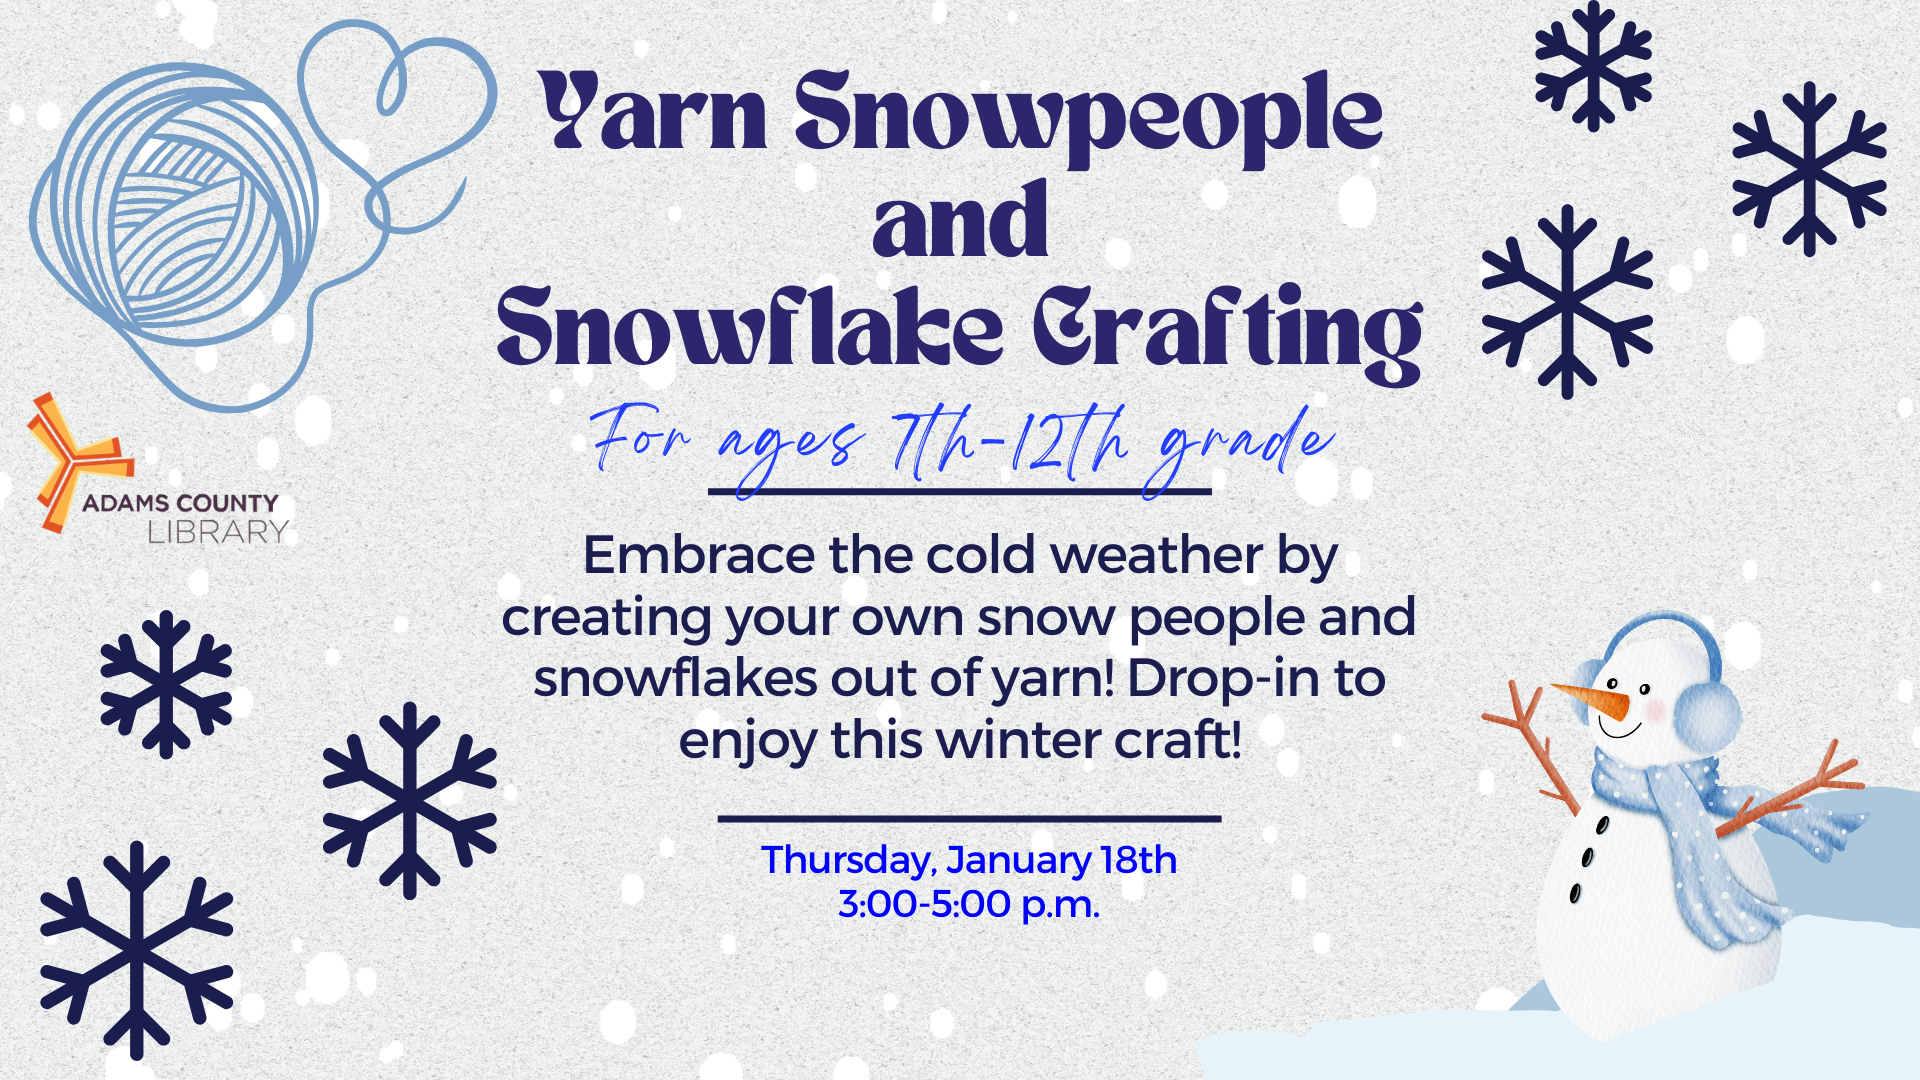 Yarn Snowpeople and Snowflake Crafting